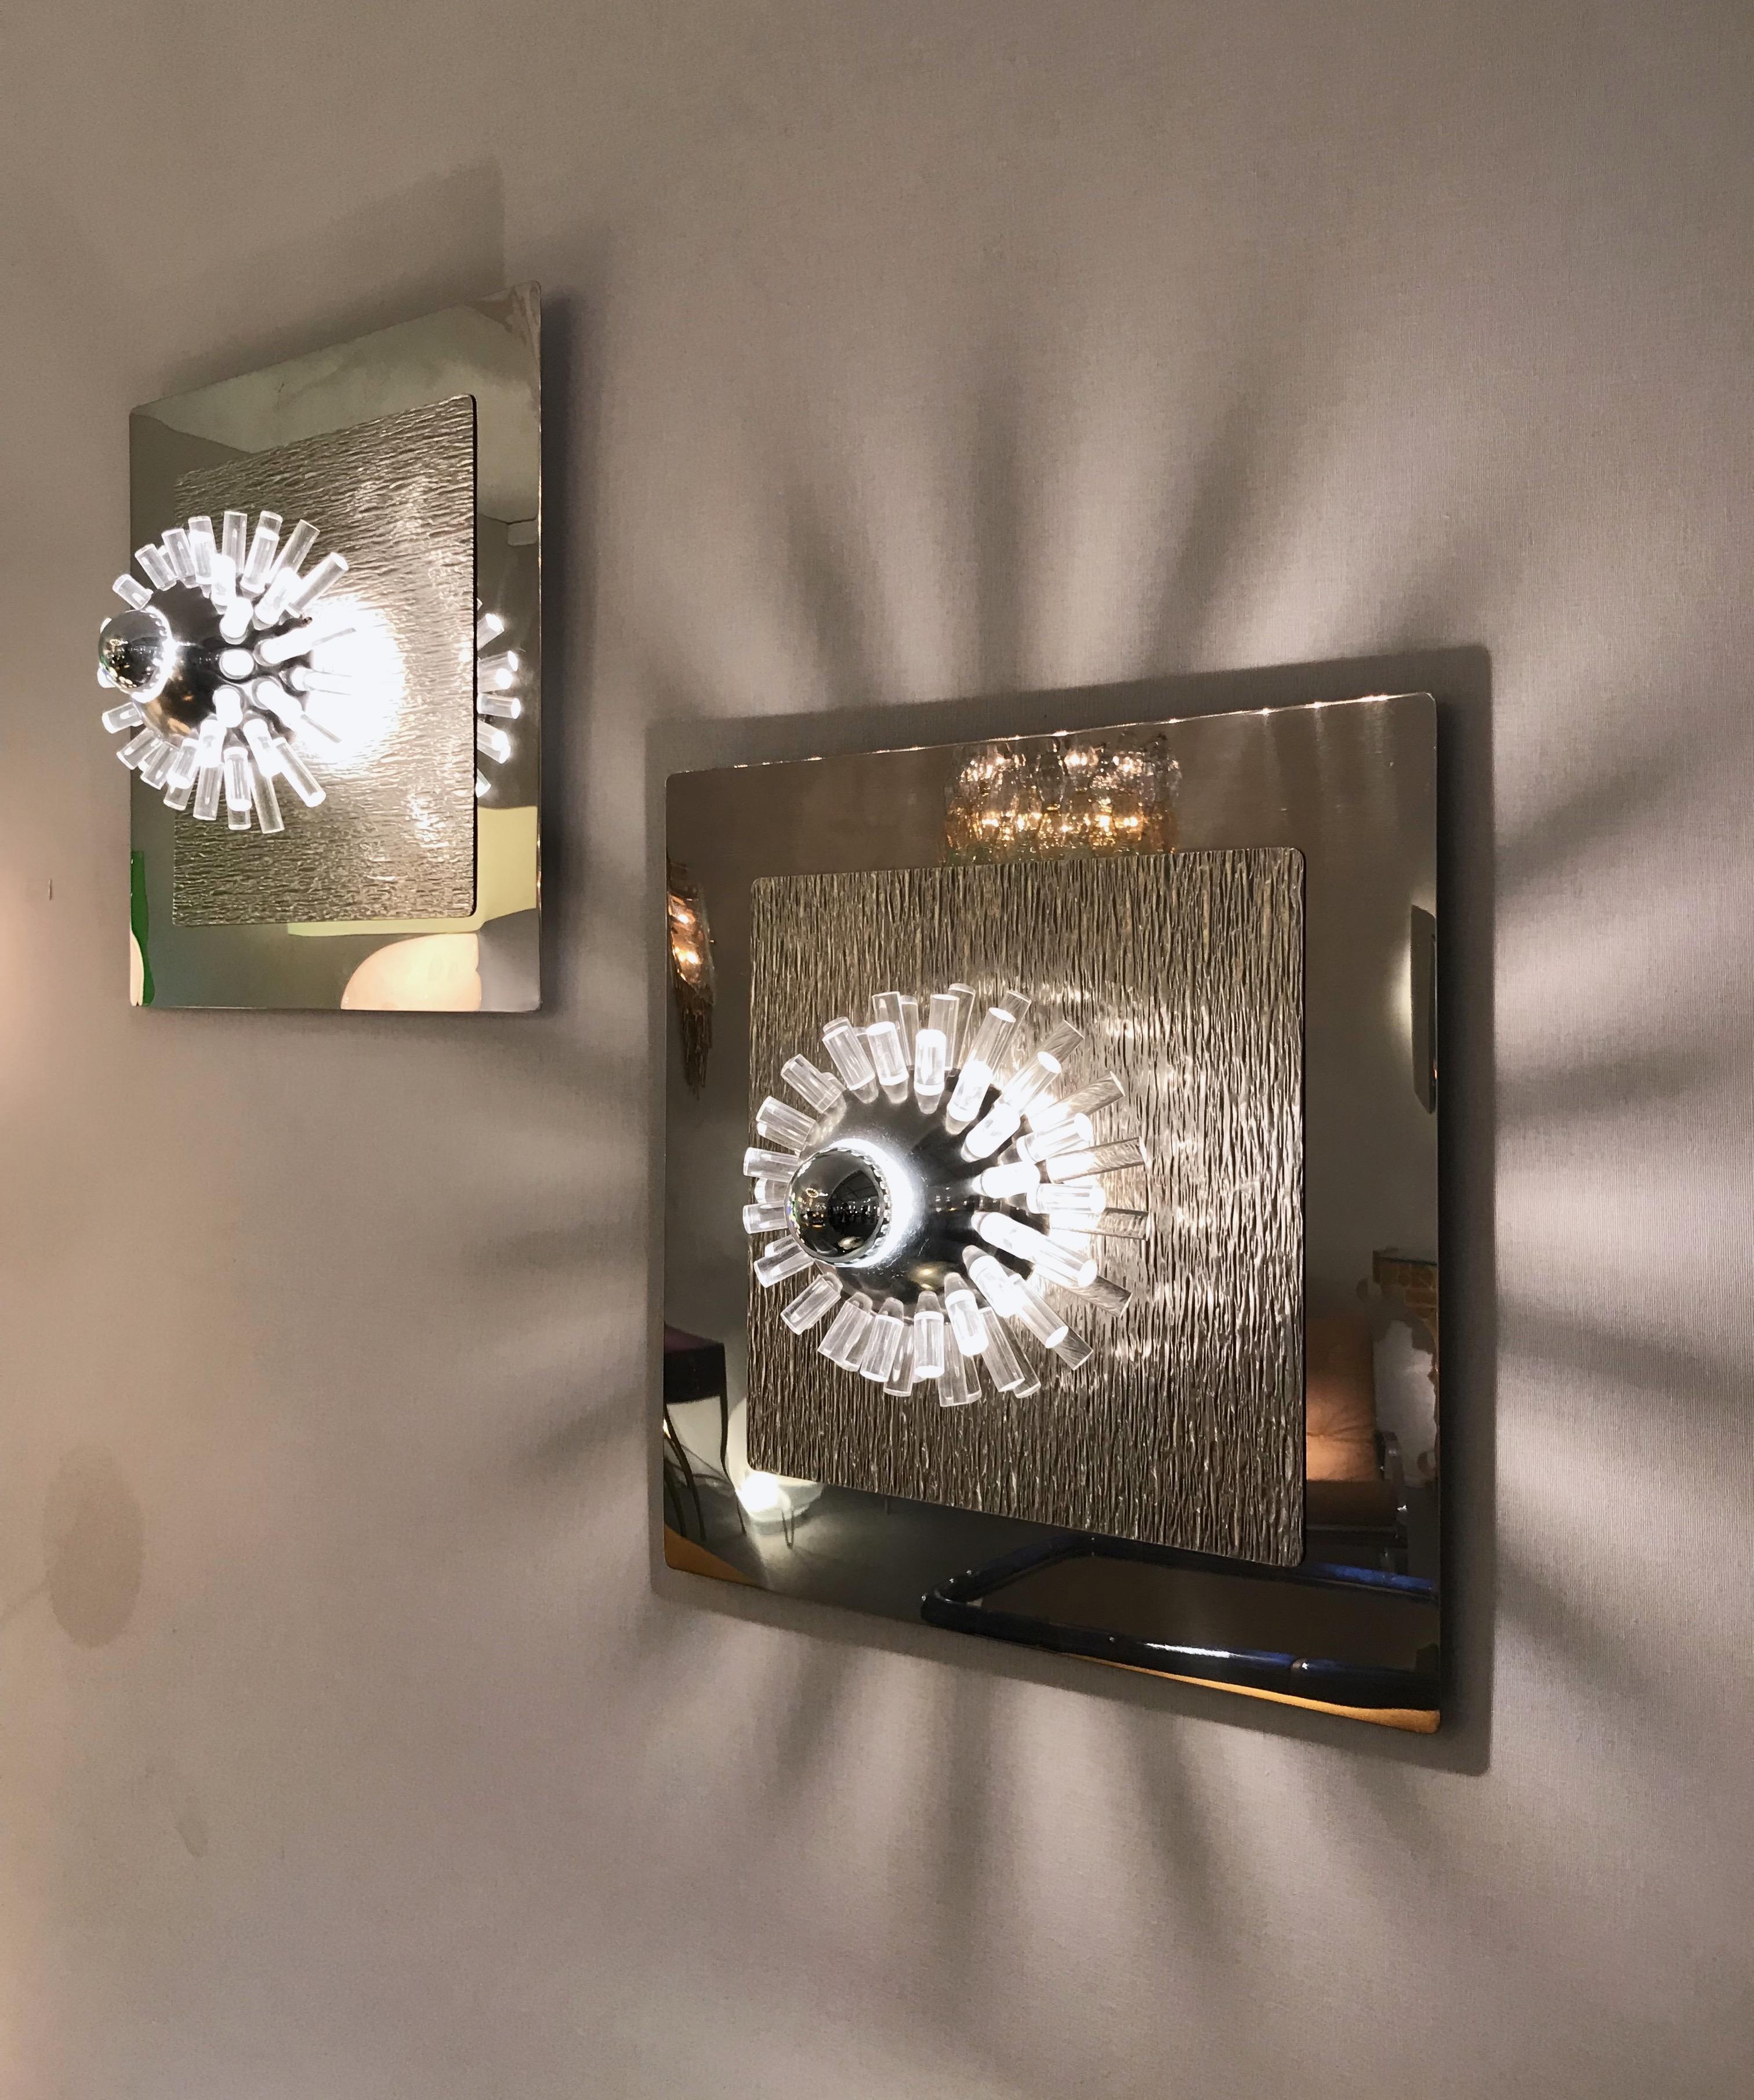 Rare large pair of wall lights sconces panel in polished and hammered stainless steel with metal ball and Lucite rods that diffuses light by the designer Angelo Brotto for the manufacture Esperia. A really Space Age work, famous design like